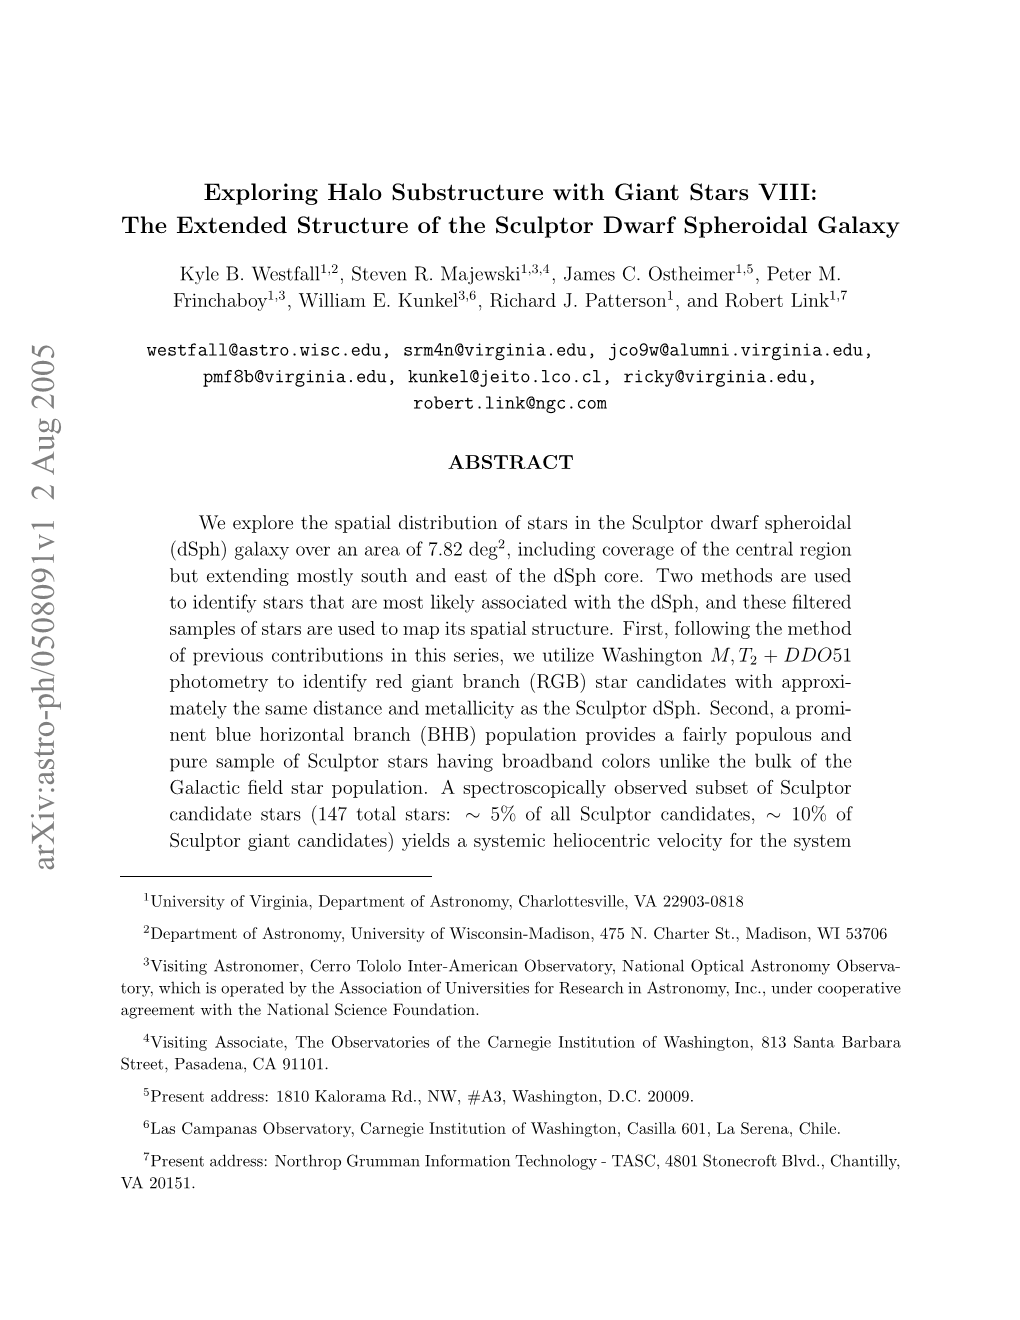 Exploring Halo Substructure with Giant Stars VIII: the Extended